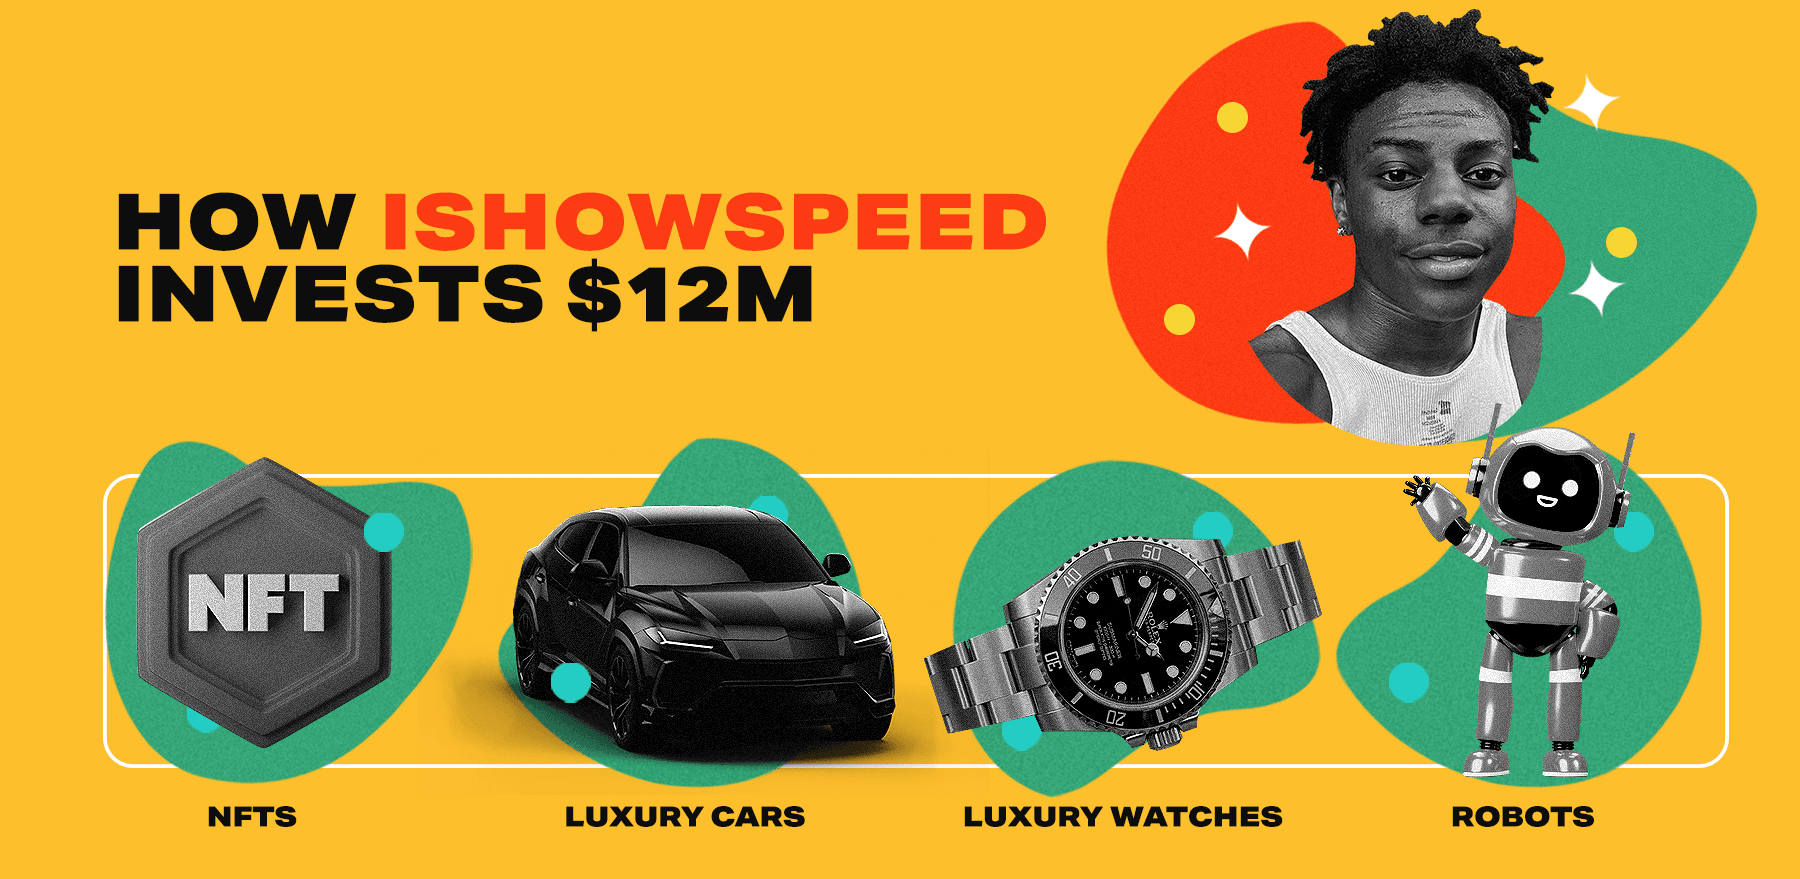 Who is TikToker IShowSpeed and what is his net worth?